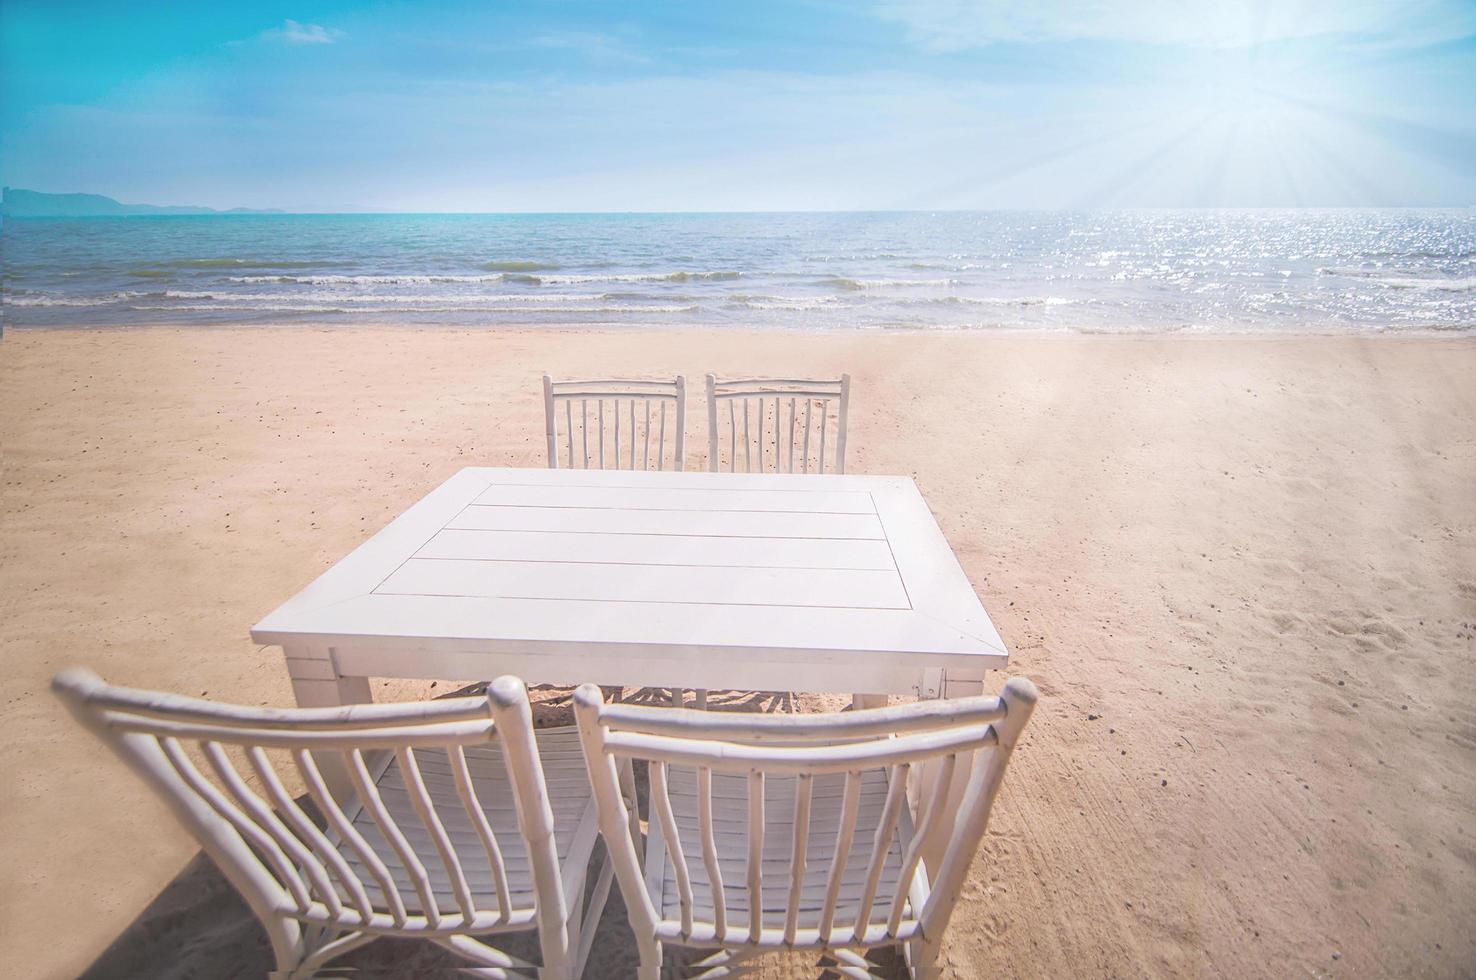 White set of relaxing chairs and table on the Pataya beach, Thailand with blue sky and sun light background photo